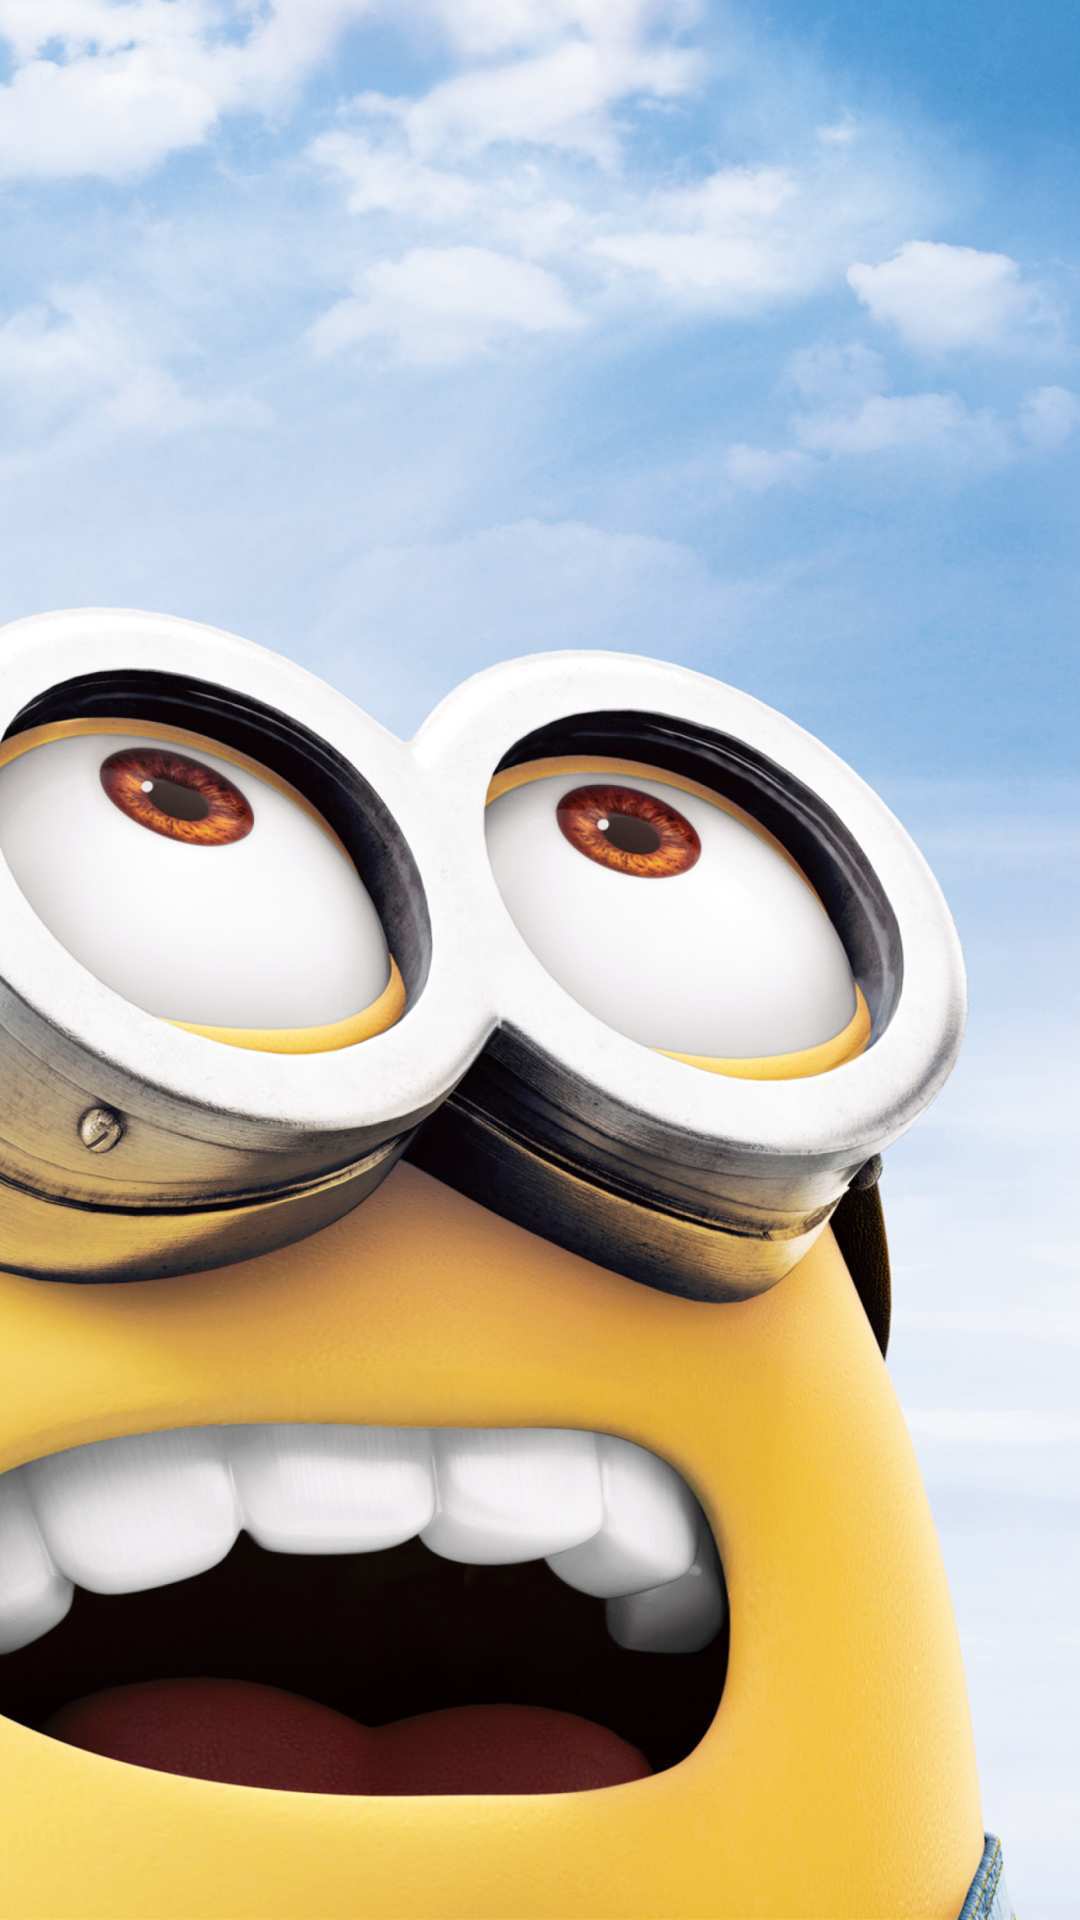 Minions HD Wallpaper For iPhone 6 Wallpaper iPhone HD